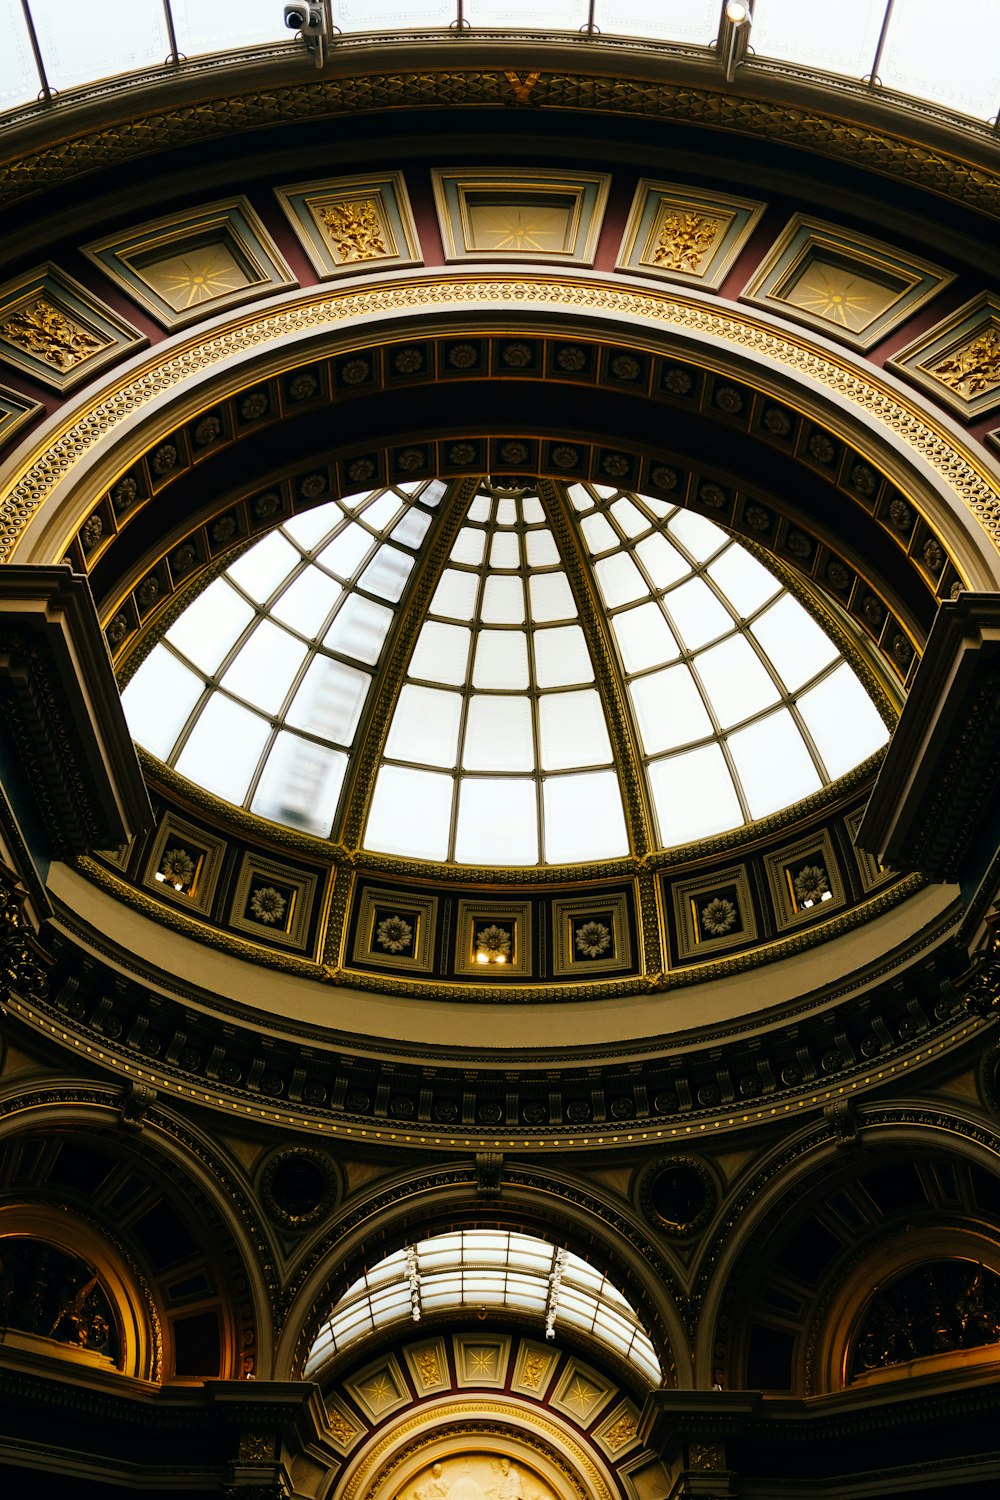 a view of the ceiling of a large building